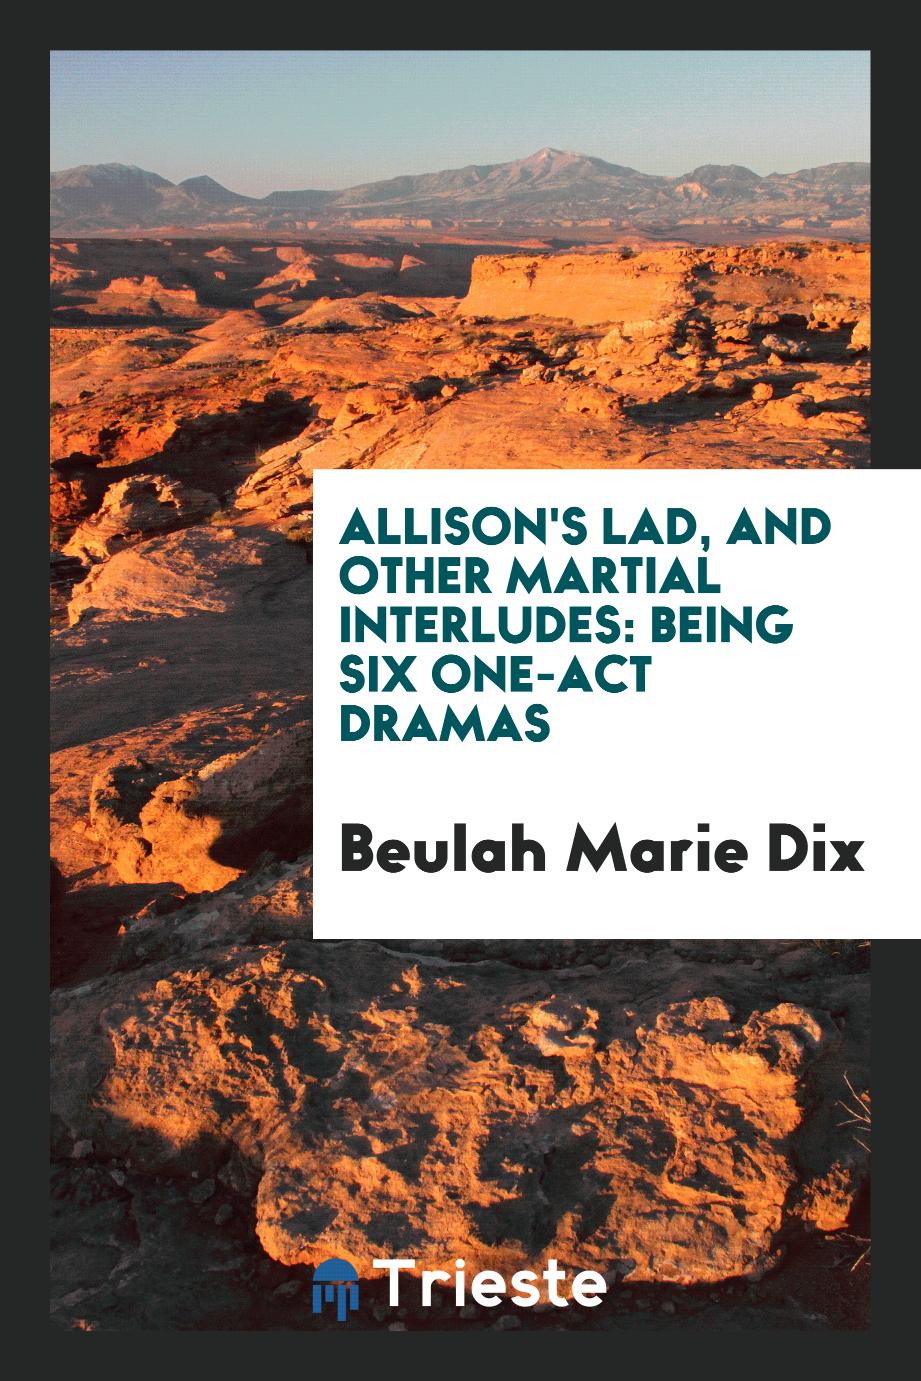 Allison's lad, and other martial interludes: being six one-act dramas